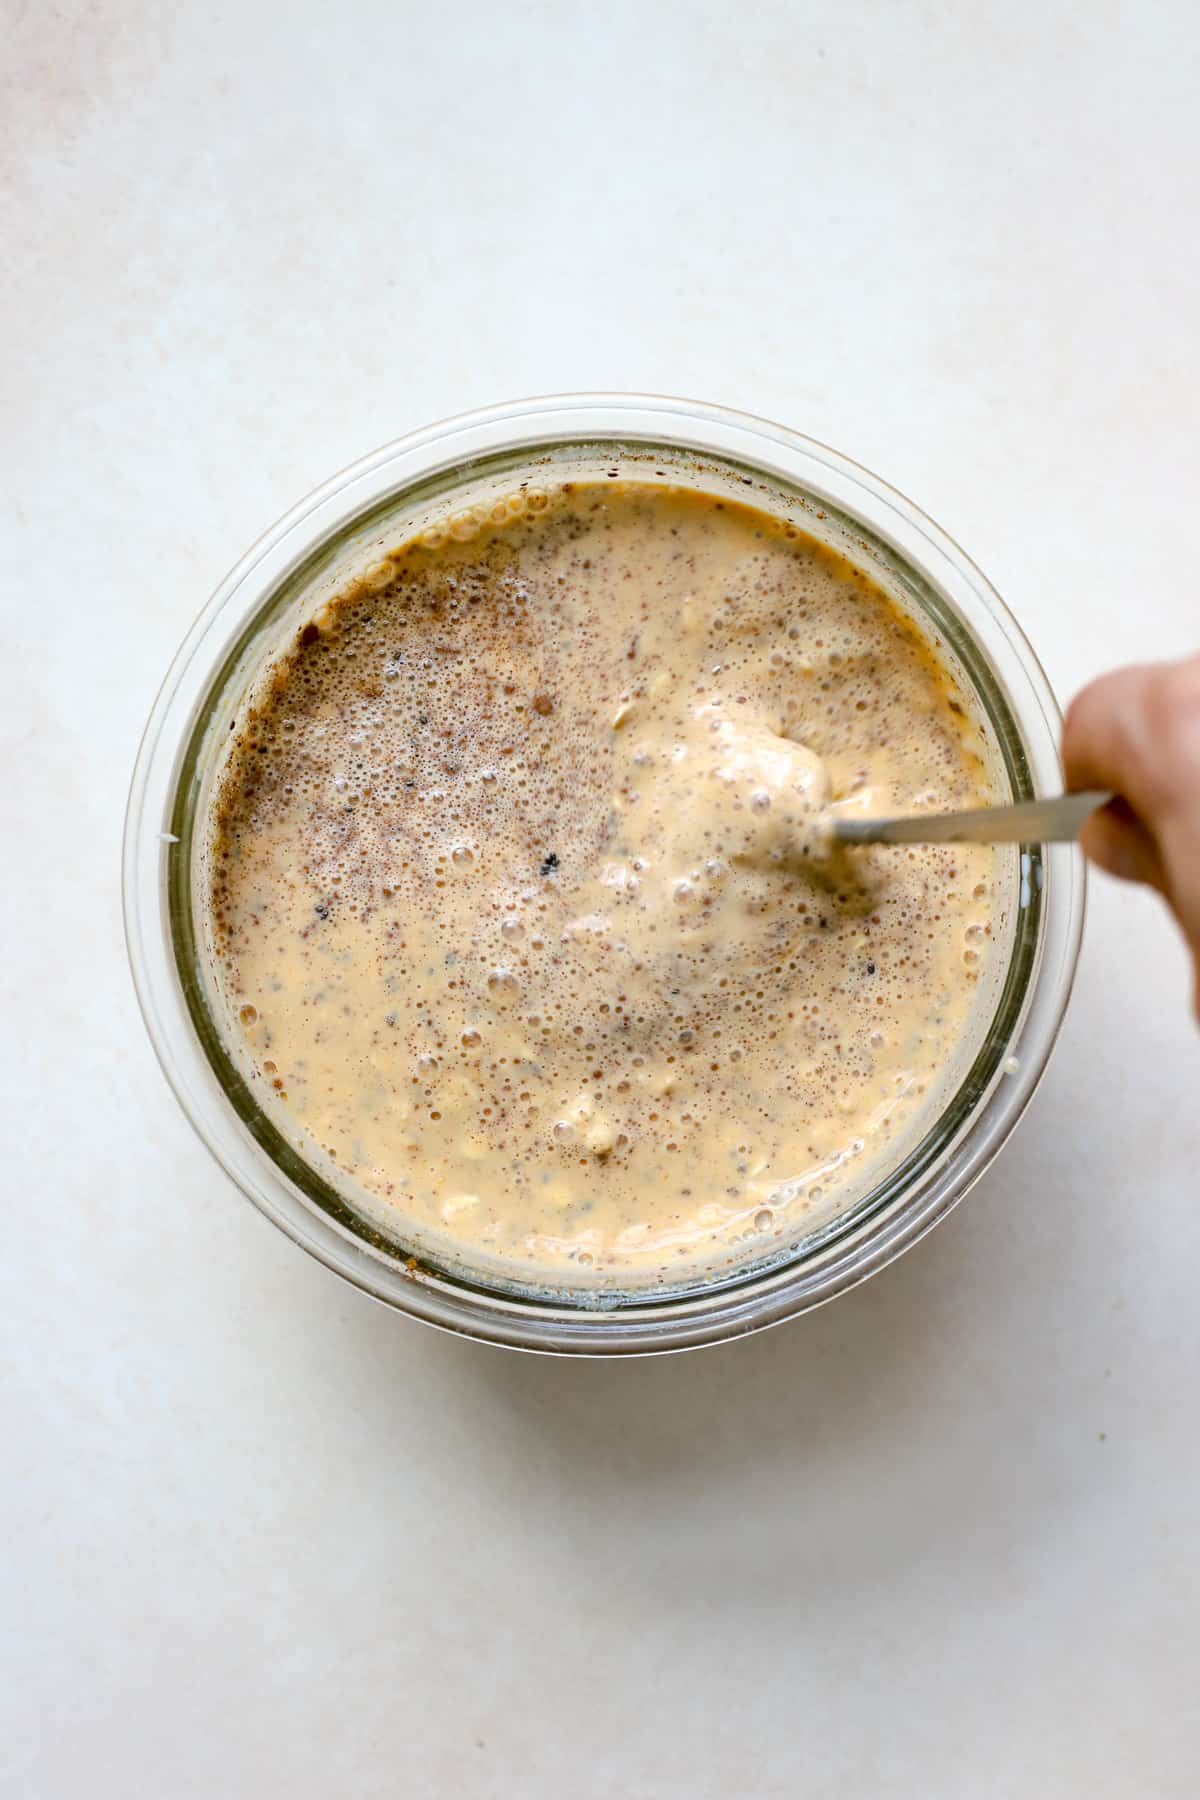 All overnight oats ingredients mixed together in a clear glass bowl being stirred with a spoon, on a beige and white surface.